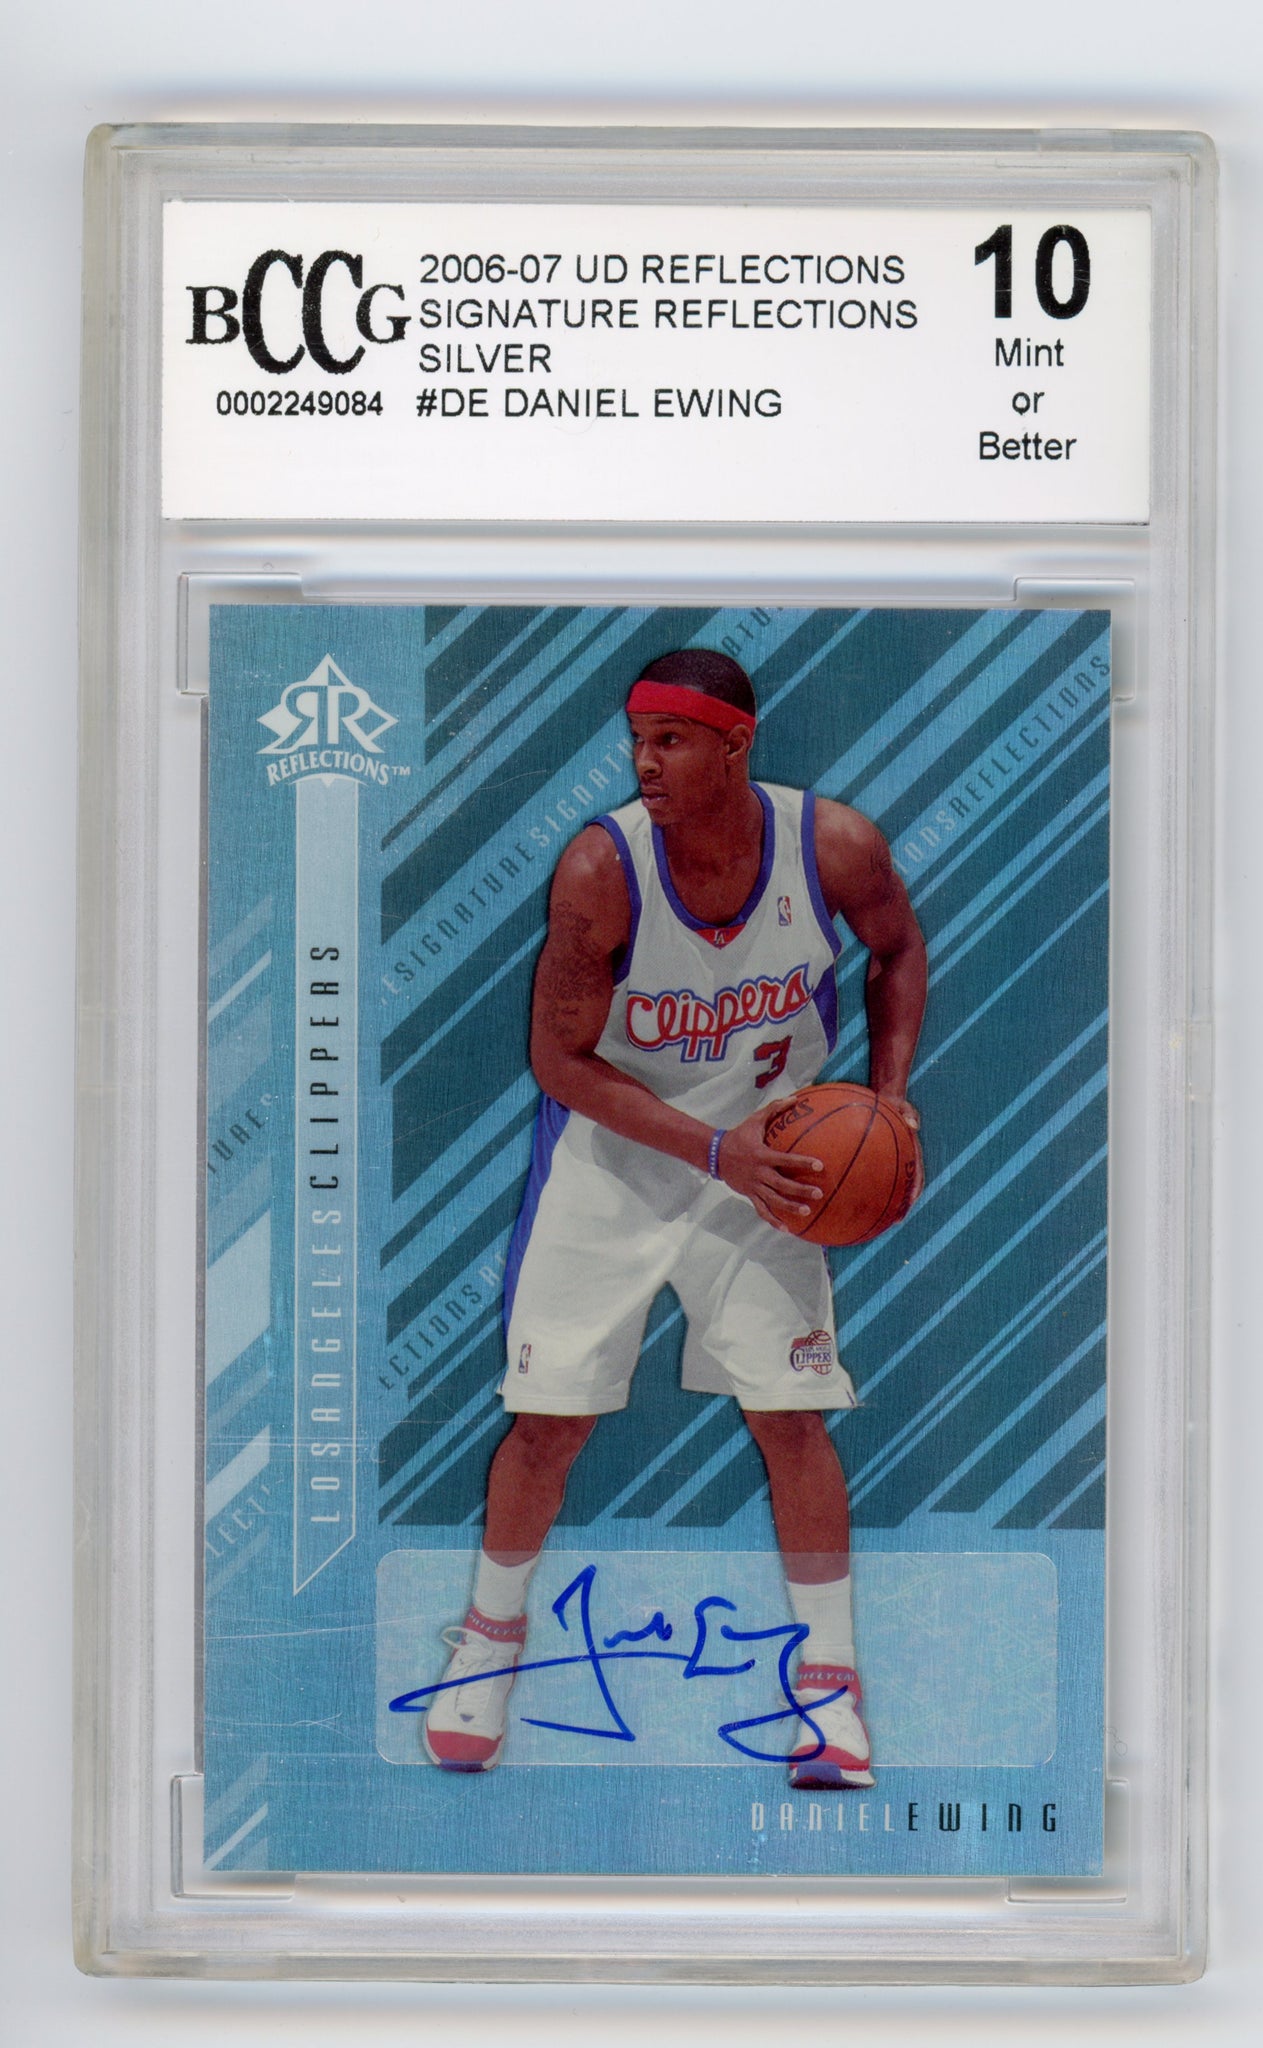 2006-2007 UD Reflections Daniel Ewing Silver Signature Los Angeles Clippers Graded Beckett 10 MINT